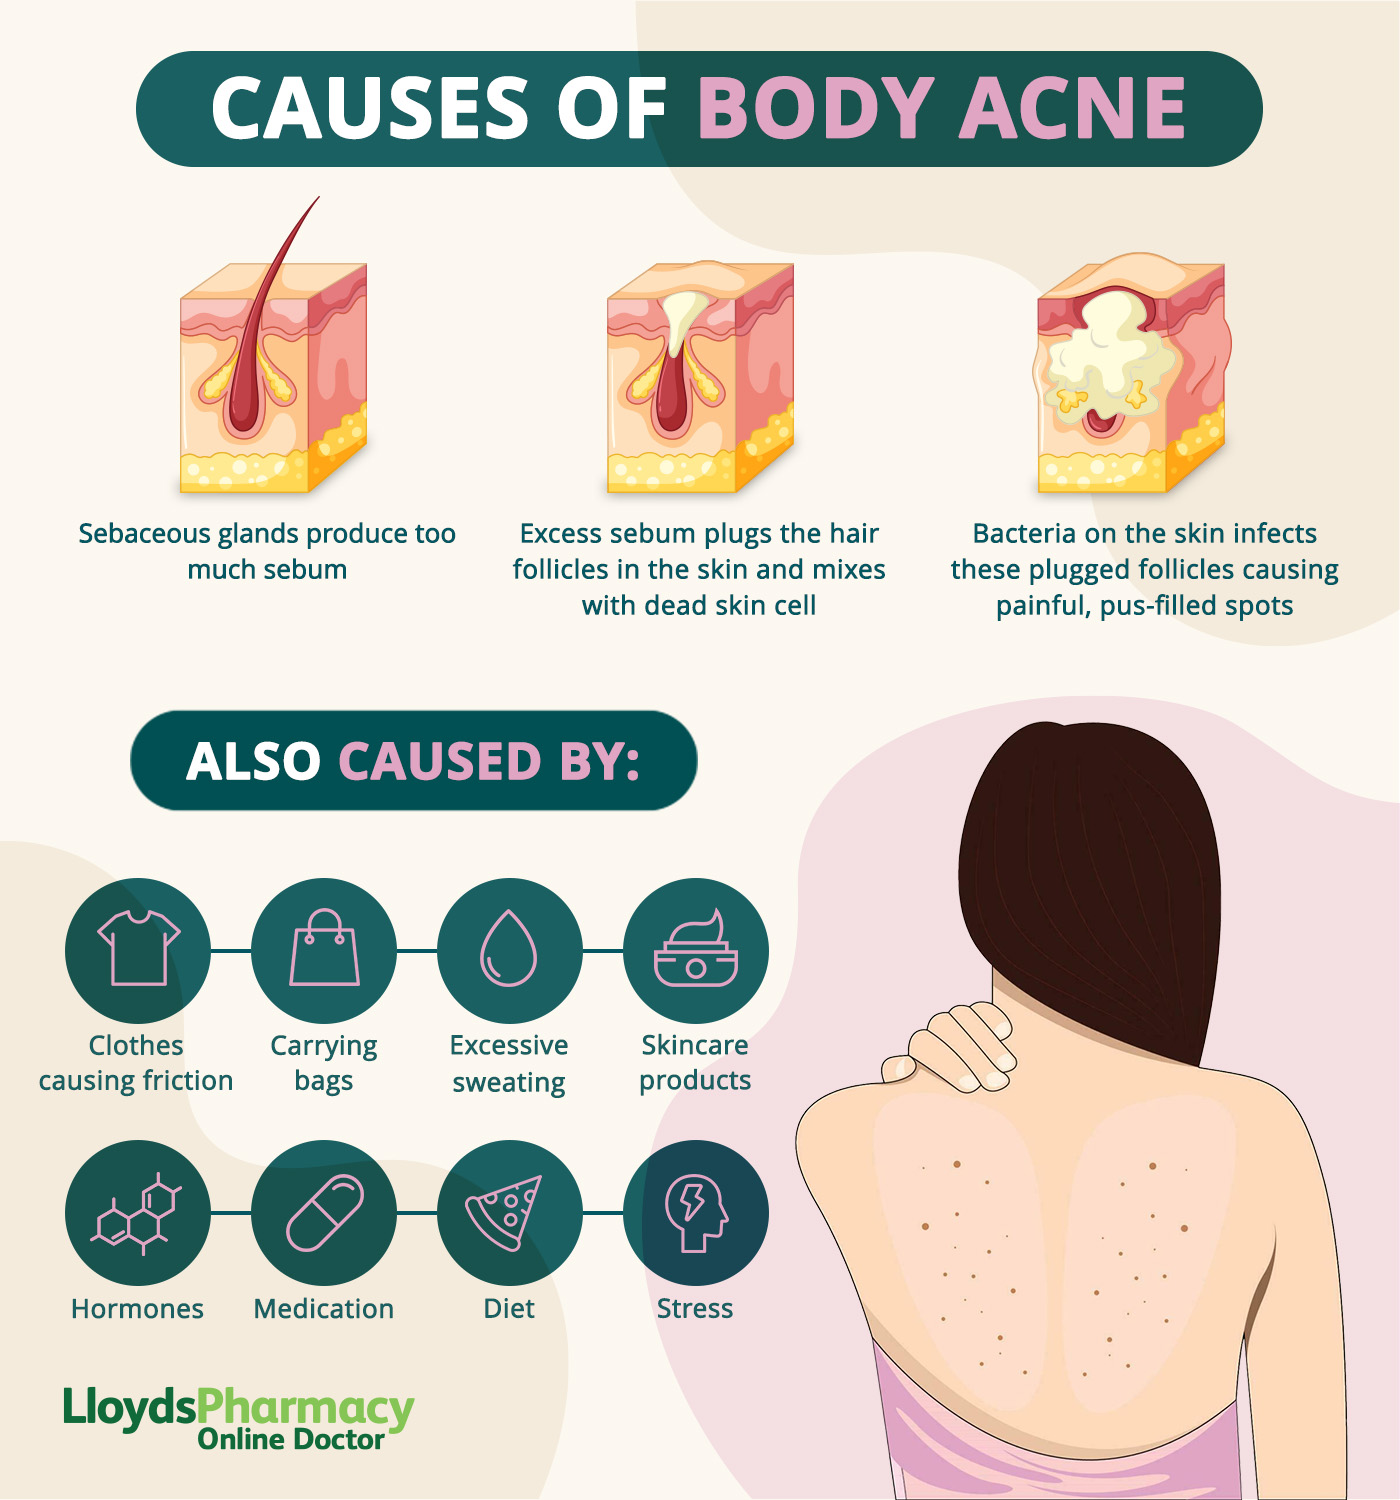 Causes of chest and back acne